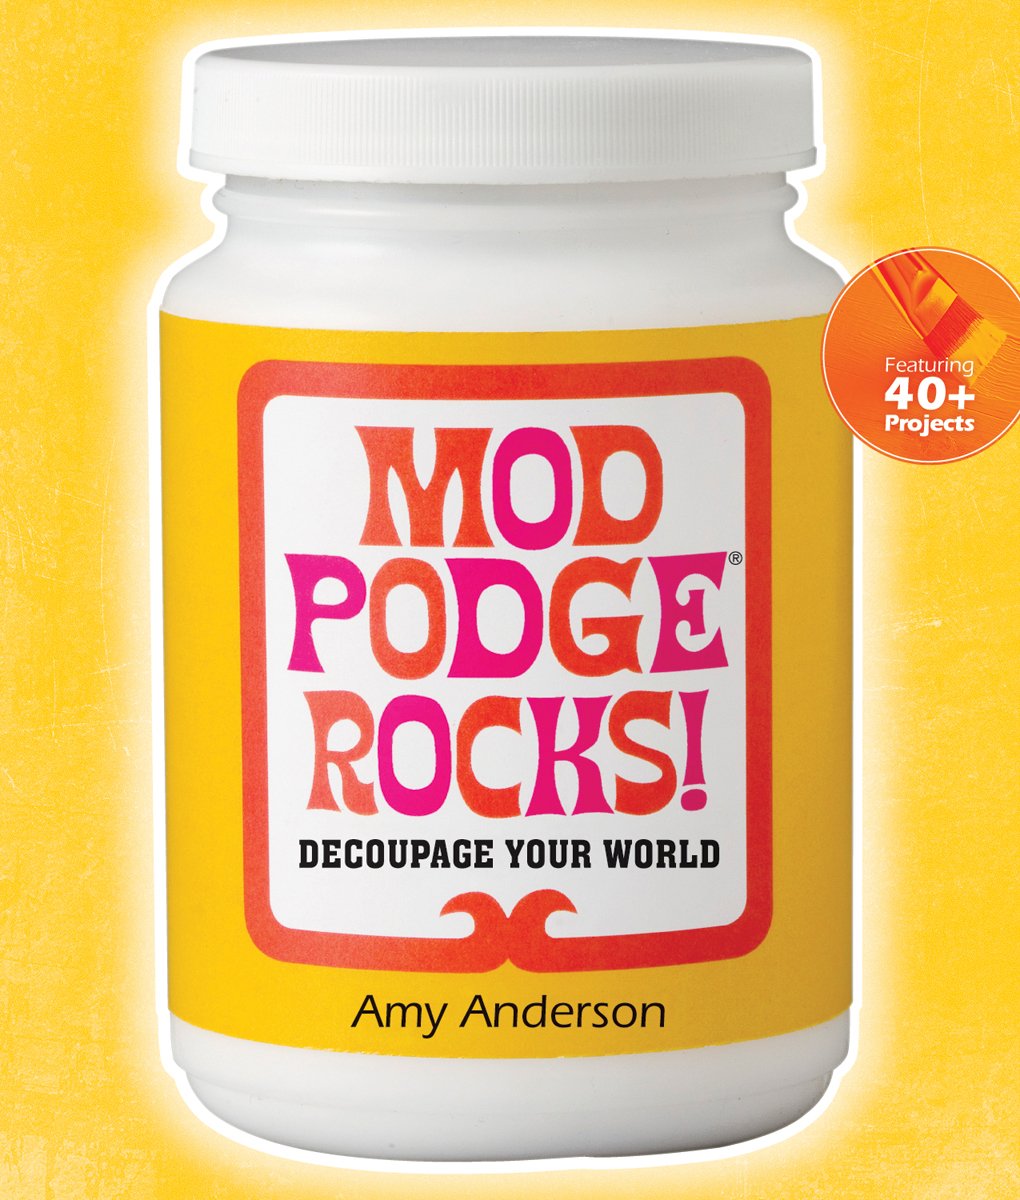 Mod Lodge Rocks by Amy Anderson